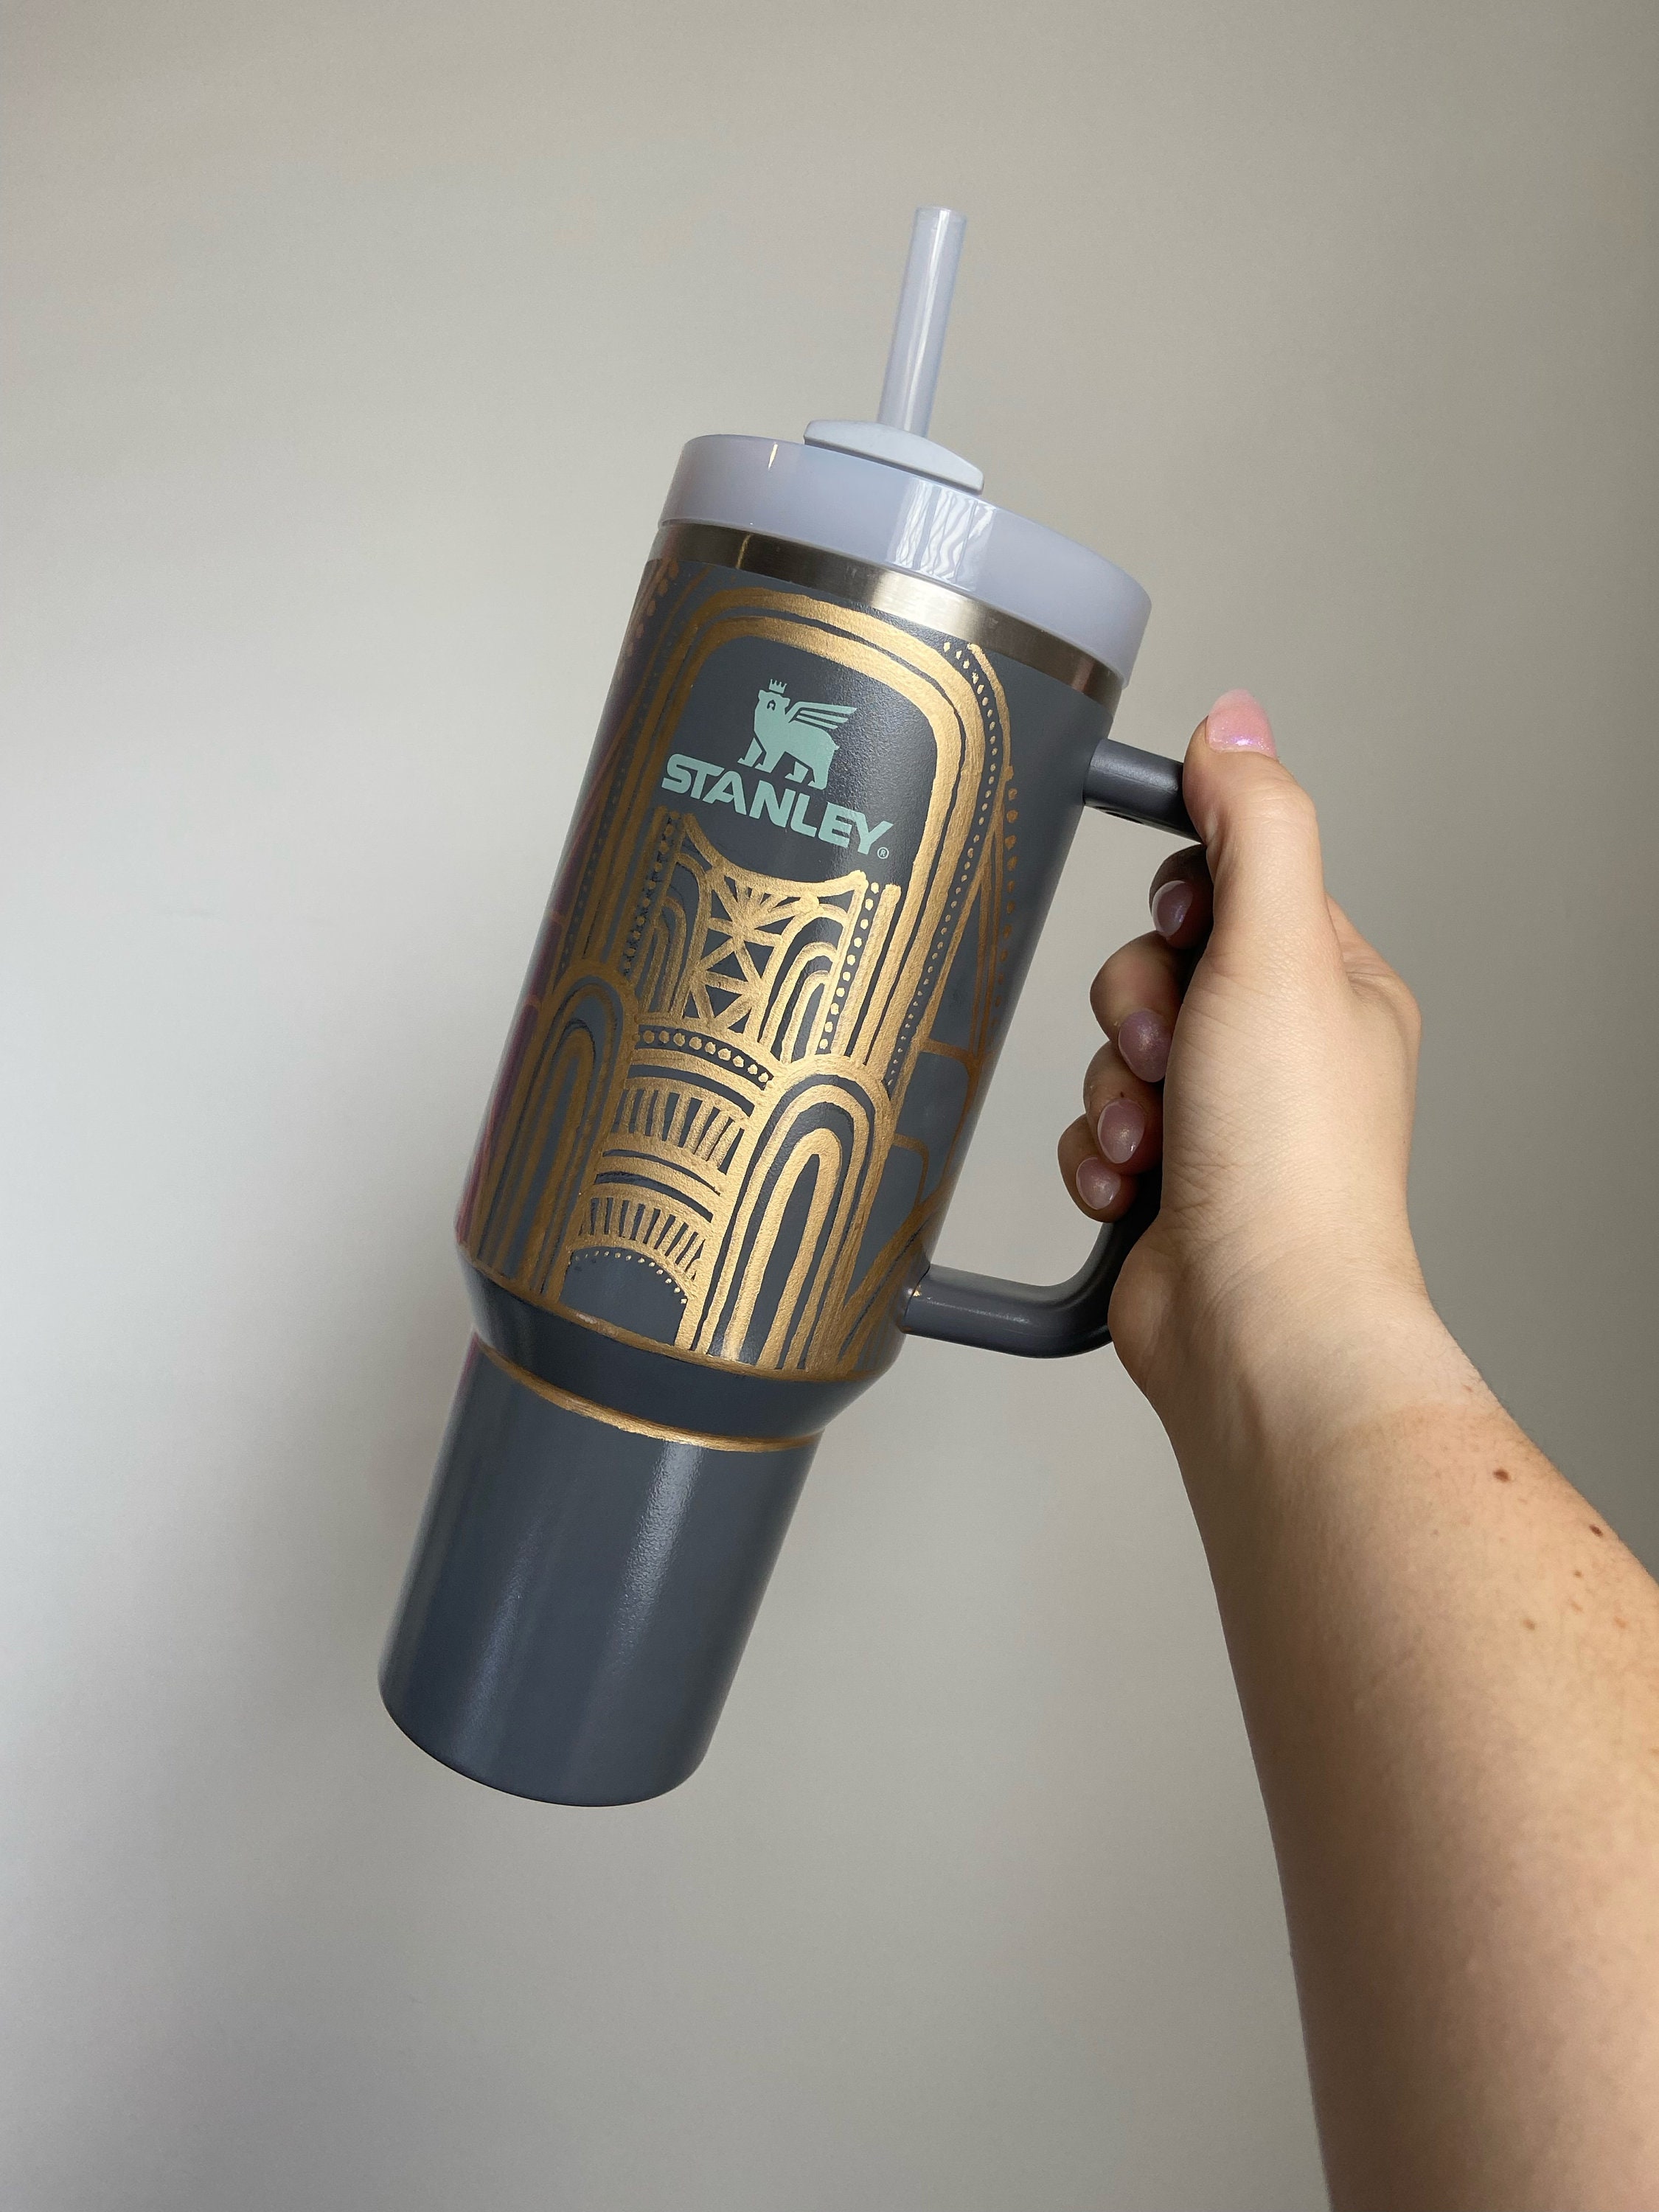 The New Stanley Tumbler Deco Collection Is Dropping This Week and